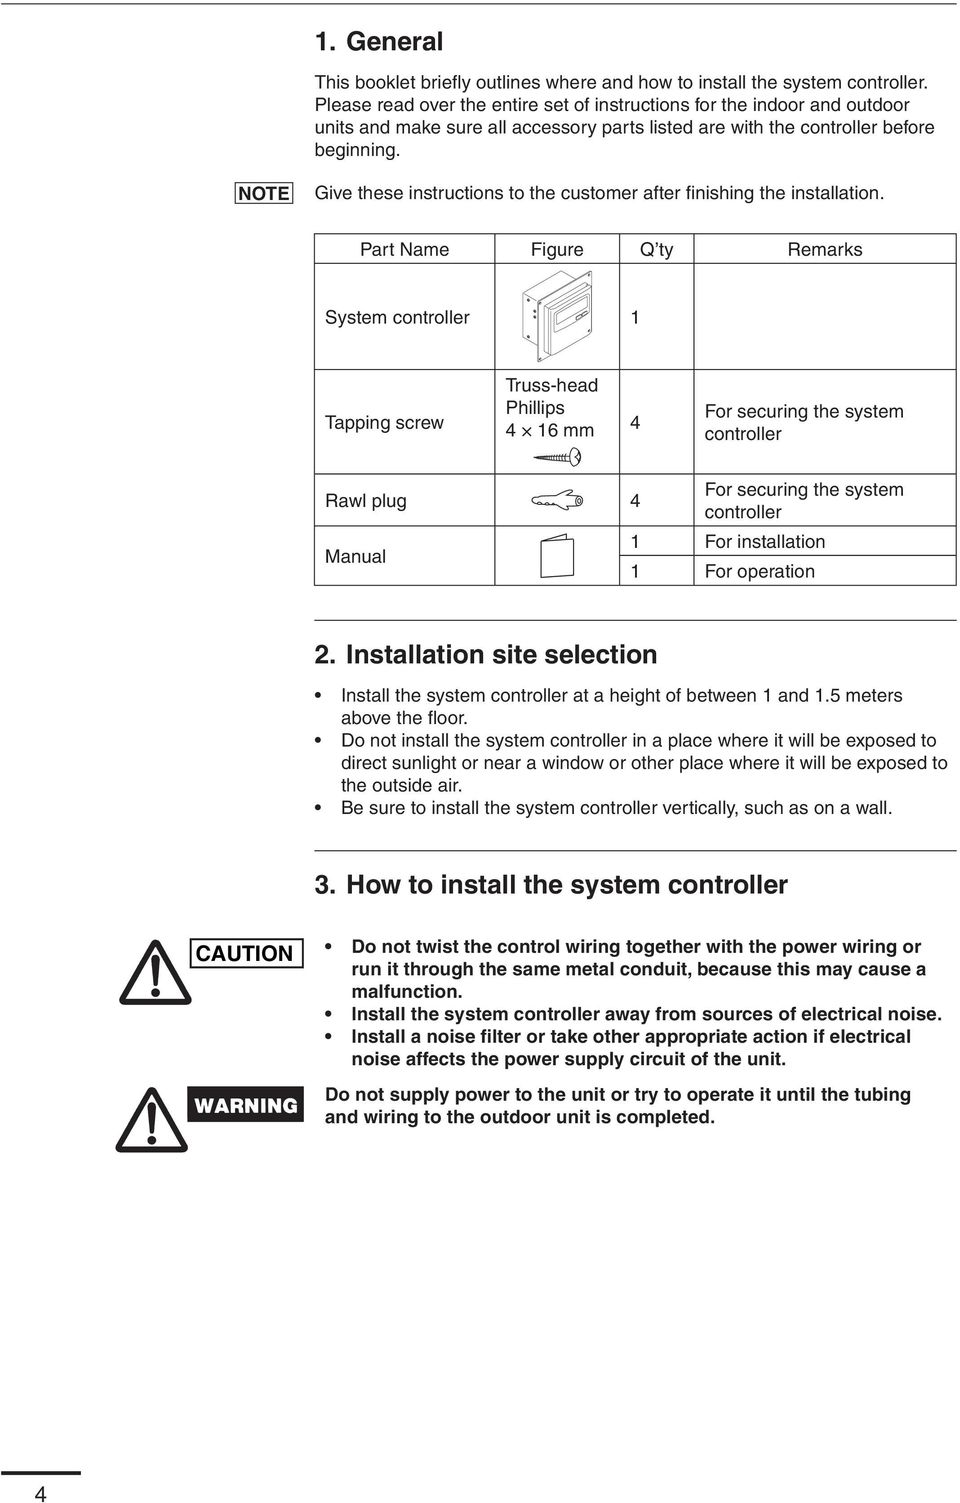 NOTE Give these instructions to the customer after fi nishing the installation.